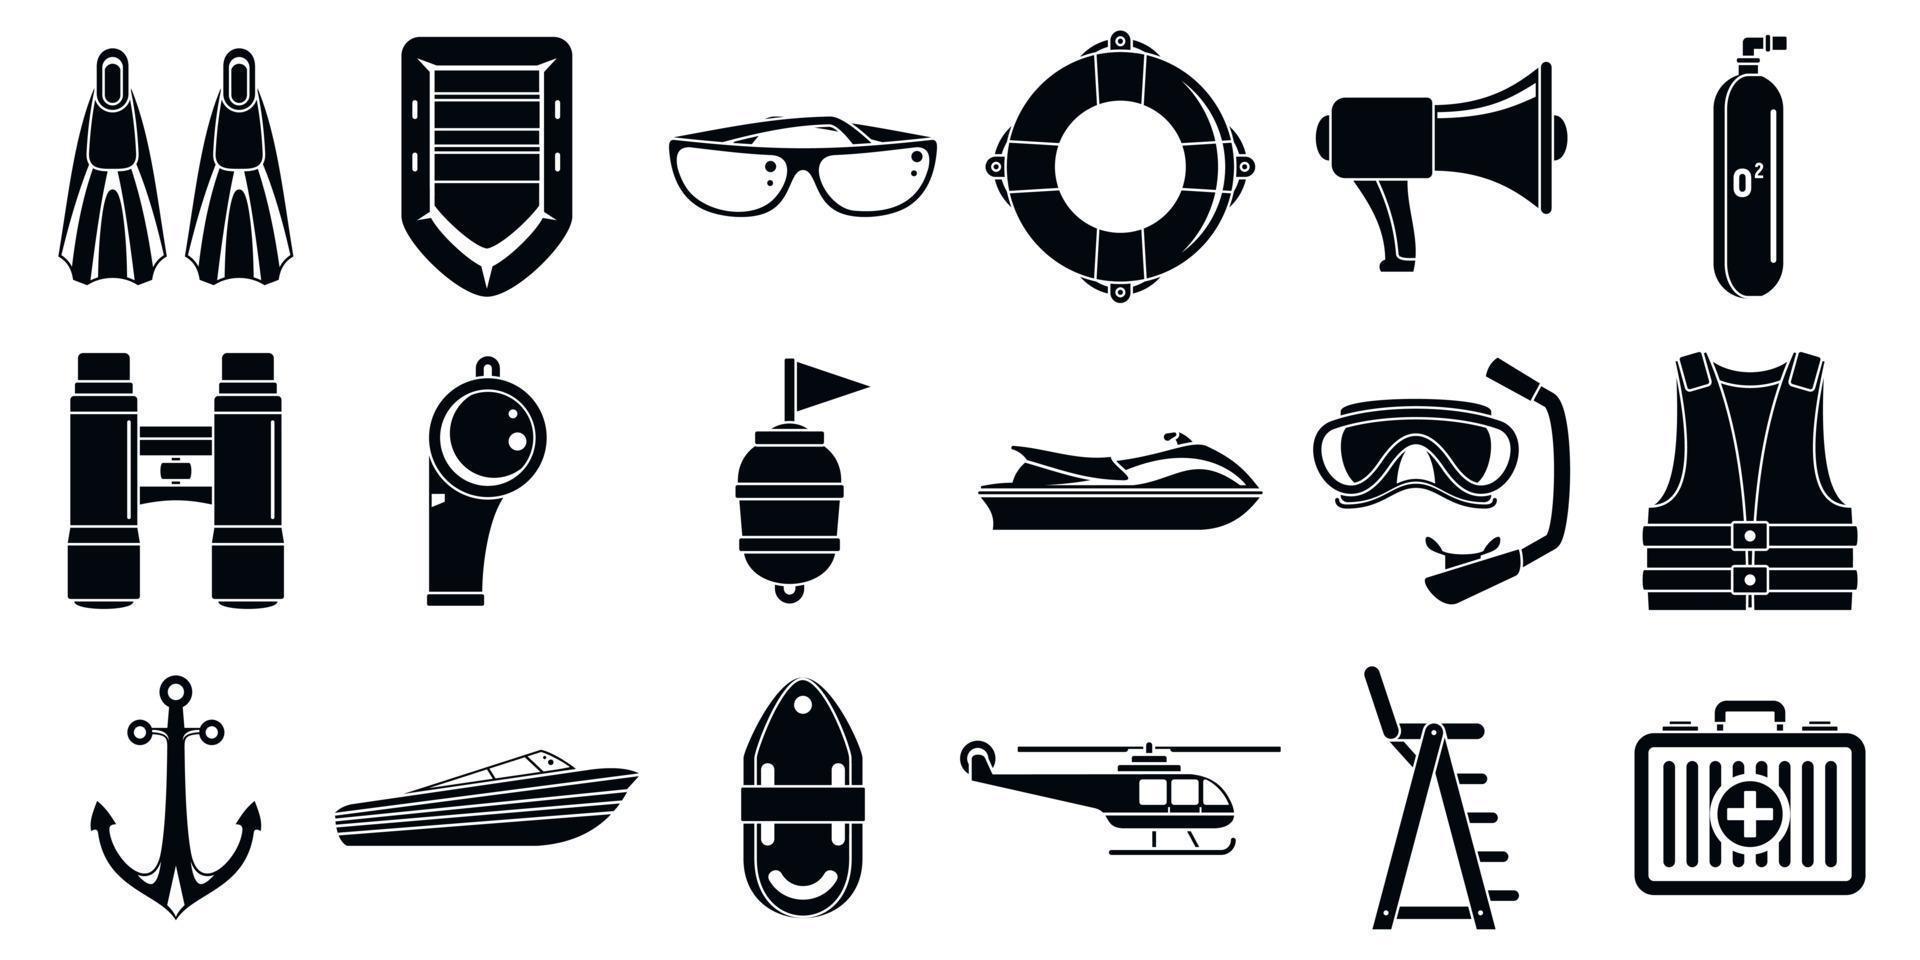 Rescue sea safety icons set, simple style vector